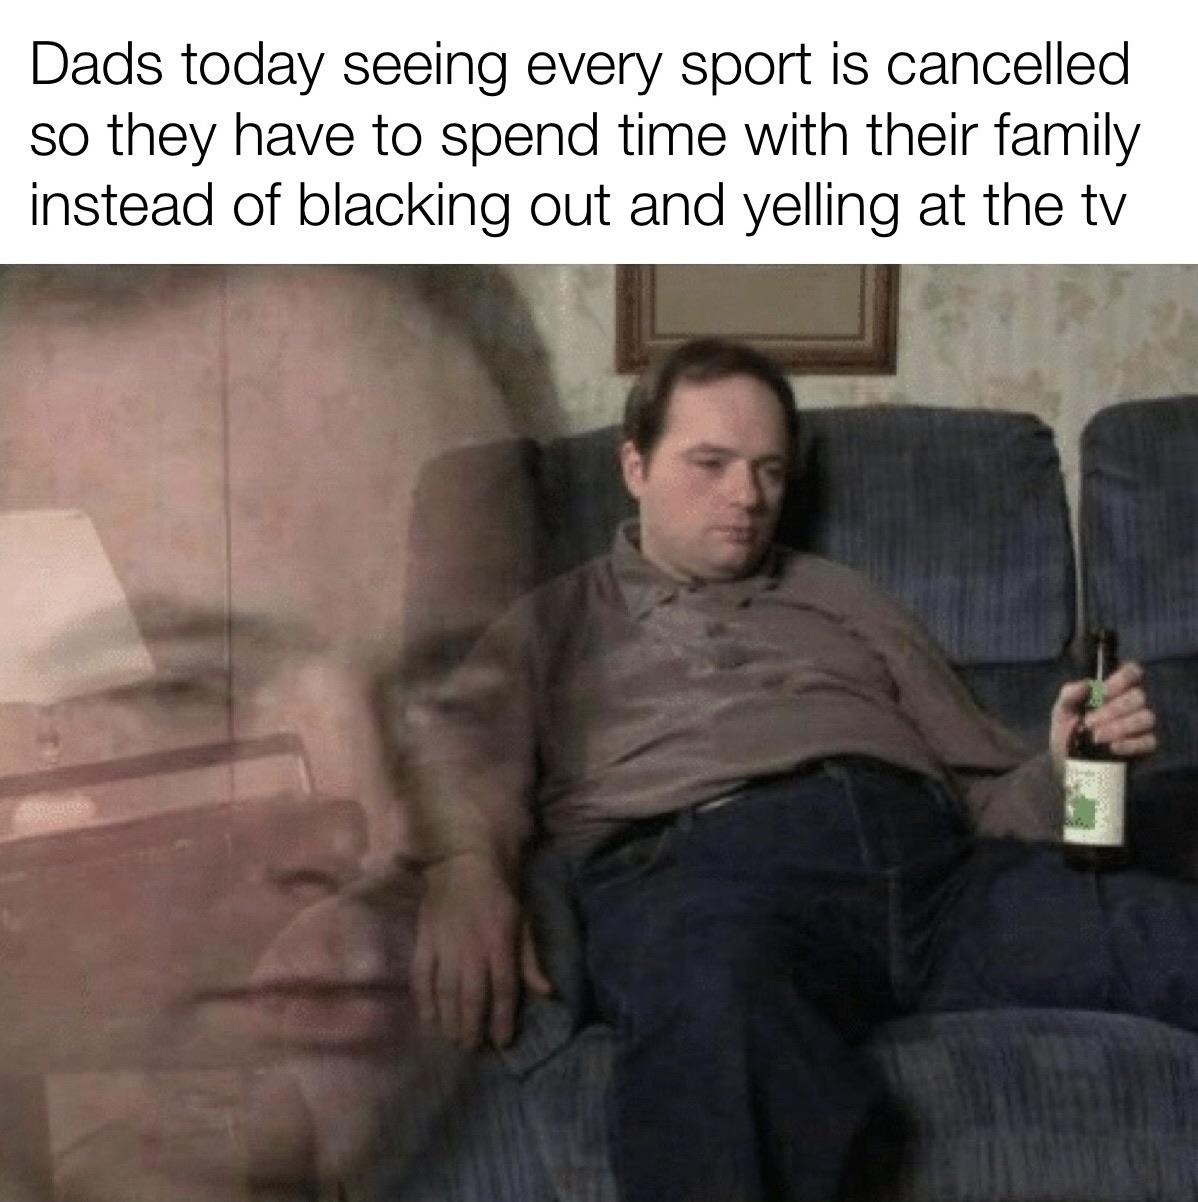 funny memes, 2020 sucks memes, coronavirus memes, friday 13th memes, toilet paper memes - reverse catfish - Dads today seeing every sport is cancelled so they have to spend time with their family instead of blacking out and yelling at the tv